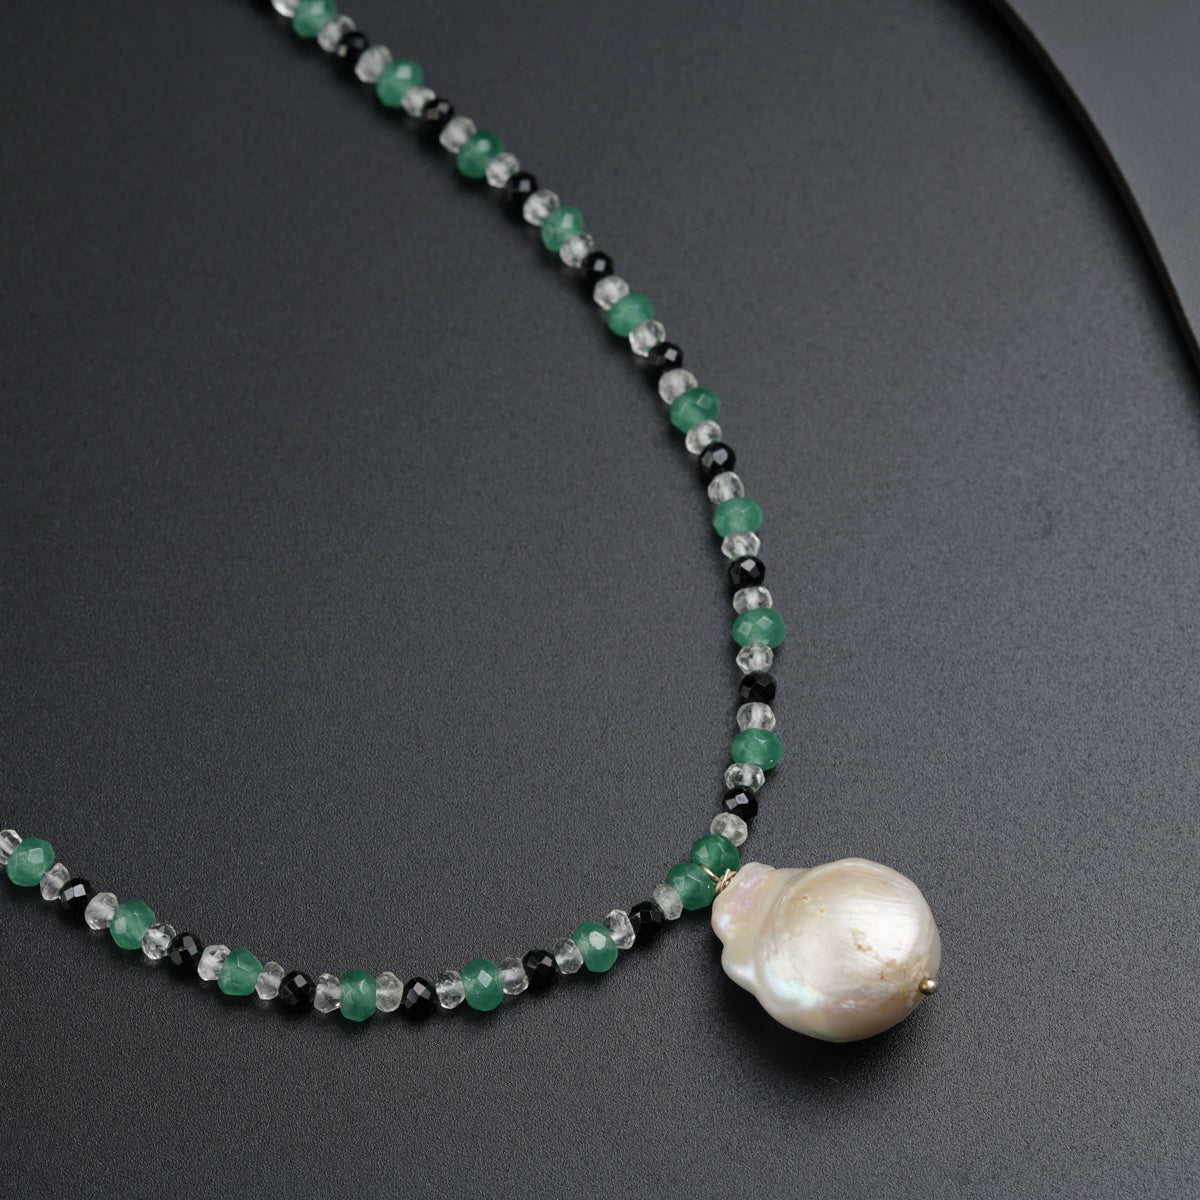 a necklace with a pearl and green beads